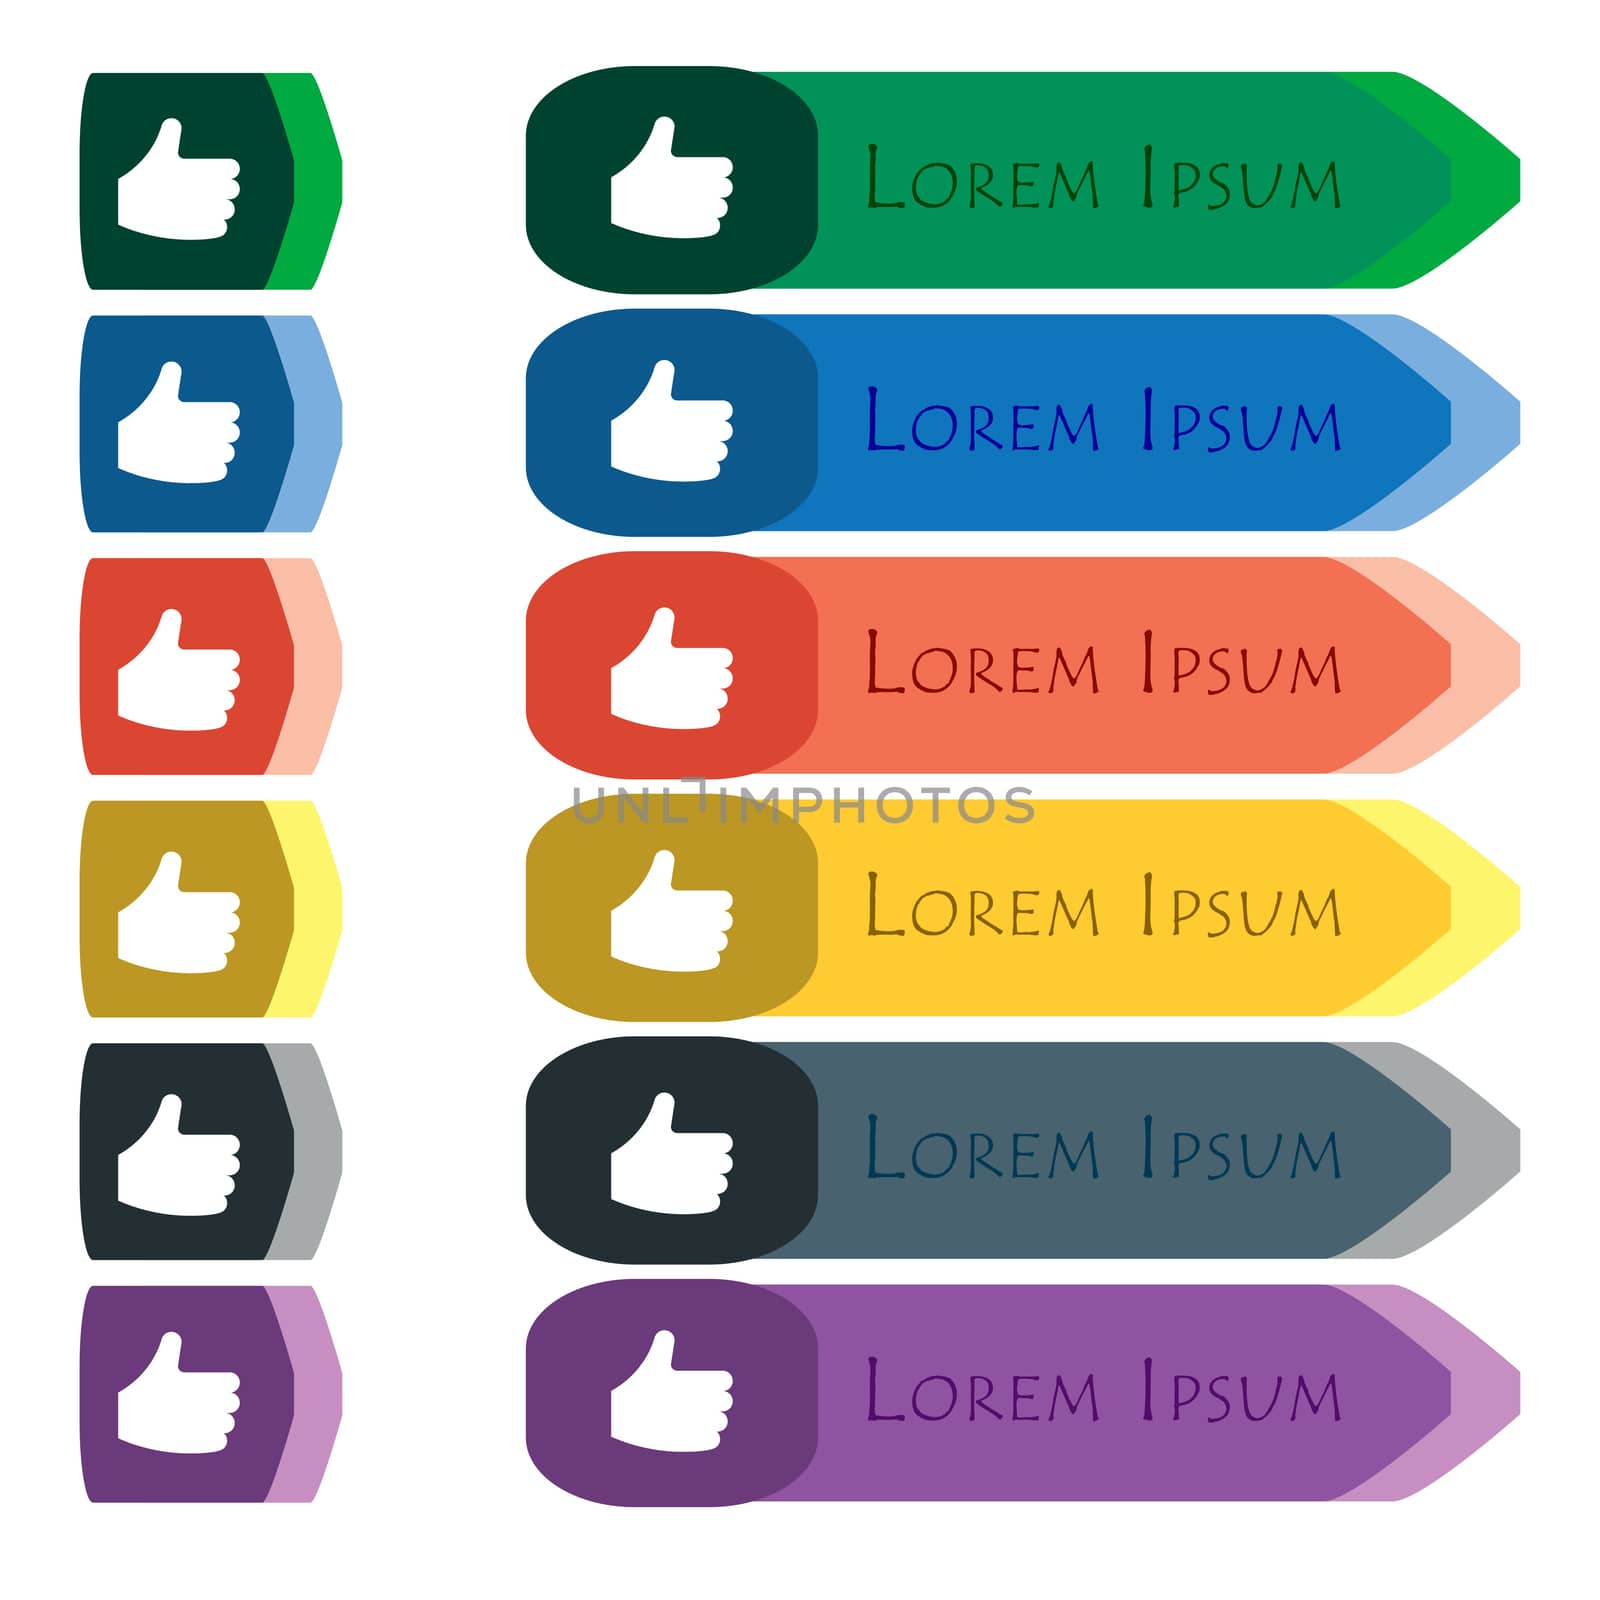 Like, Thumb up icon sign. Set of colorful, bright long buttons with additional small modules. Flat design. 